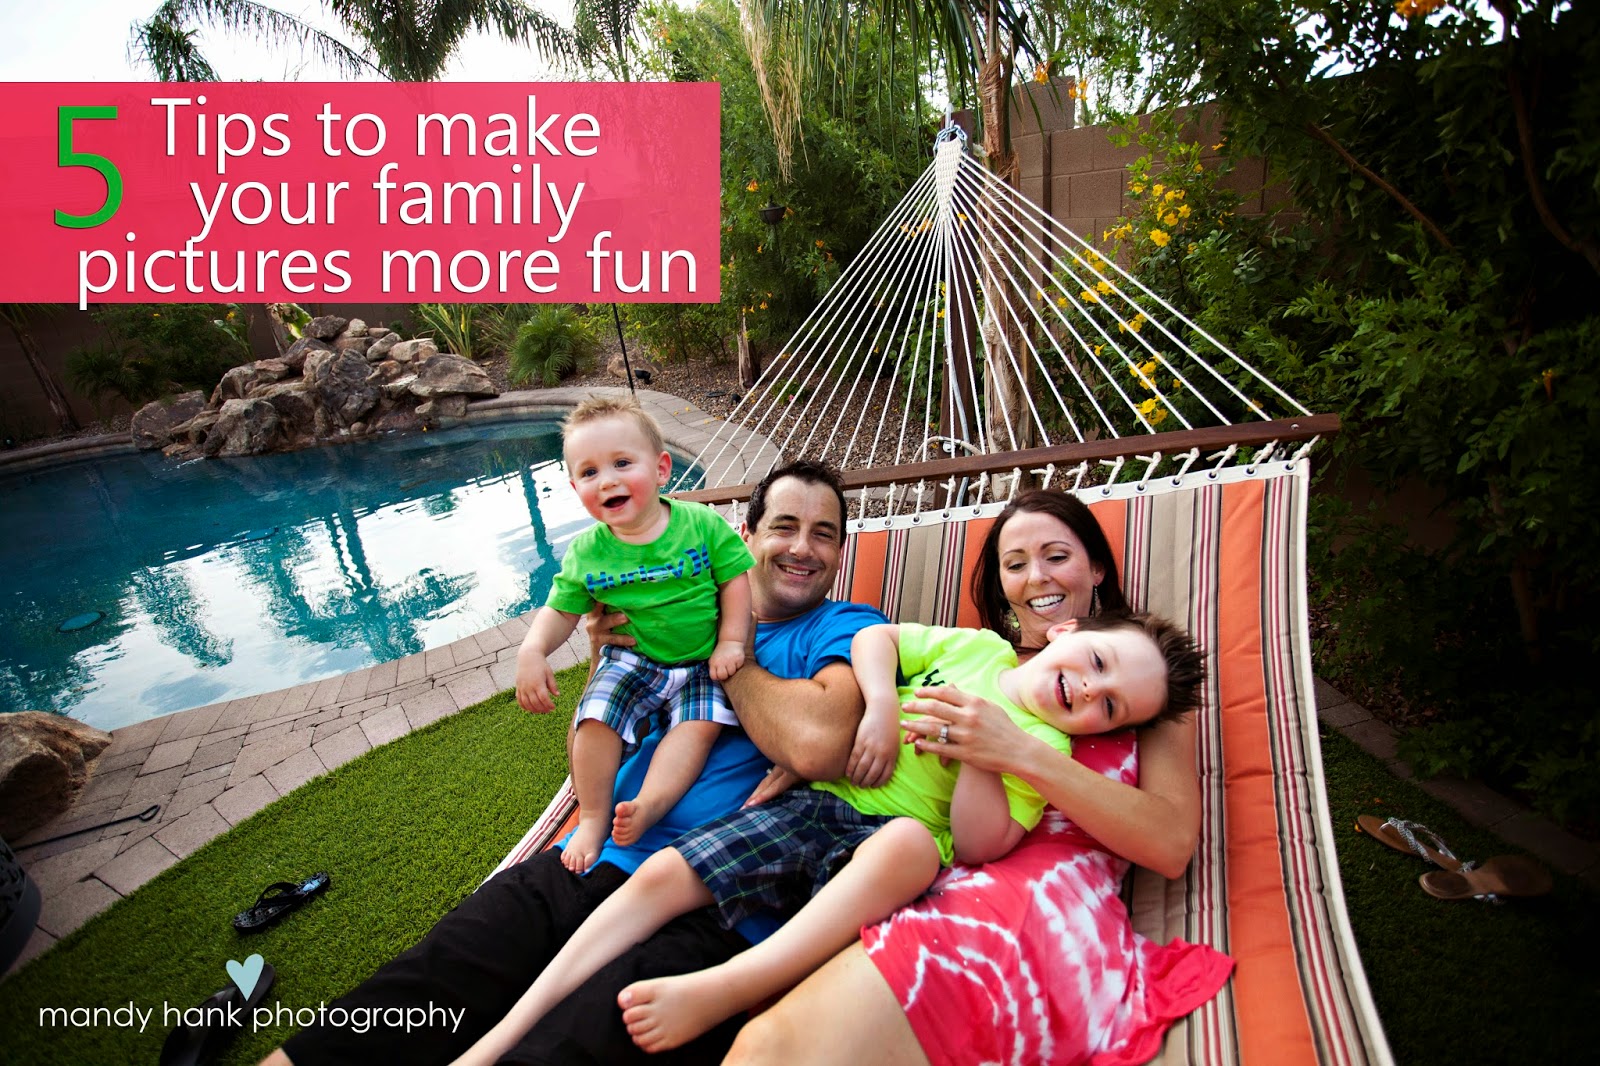 5 Tips to make your family pictures more fun poster.